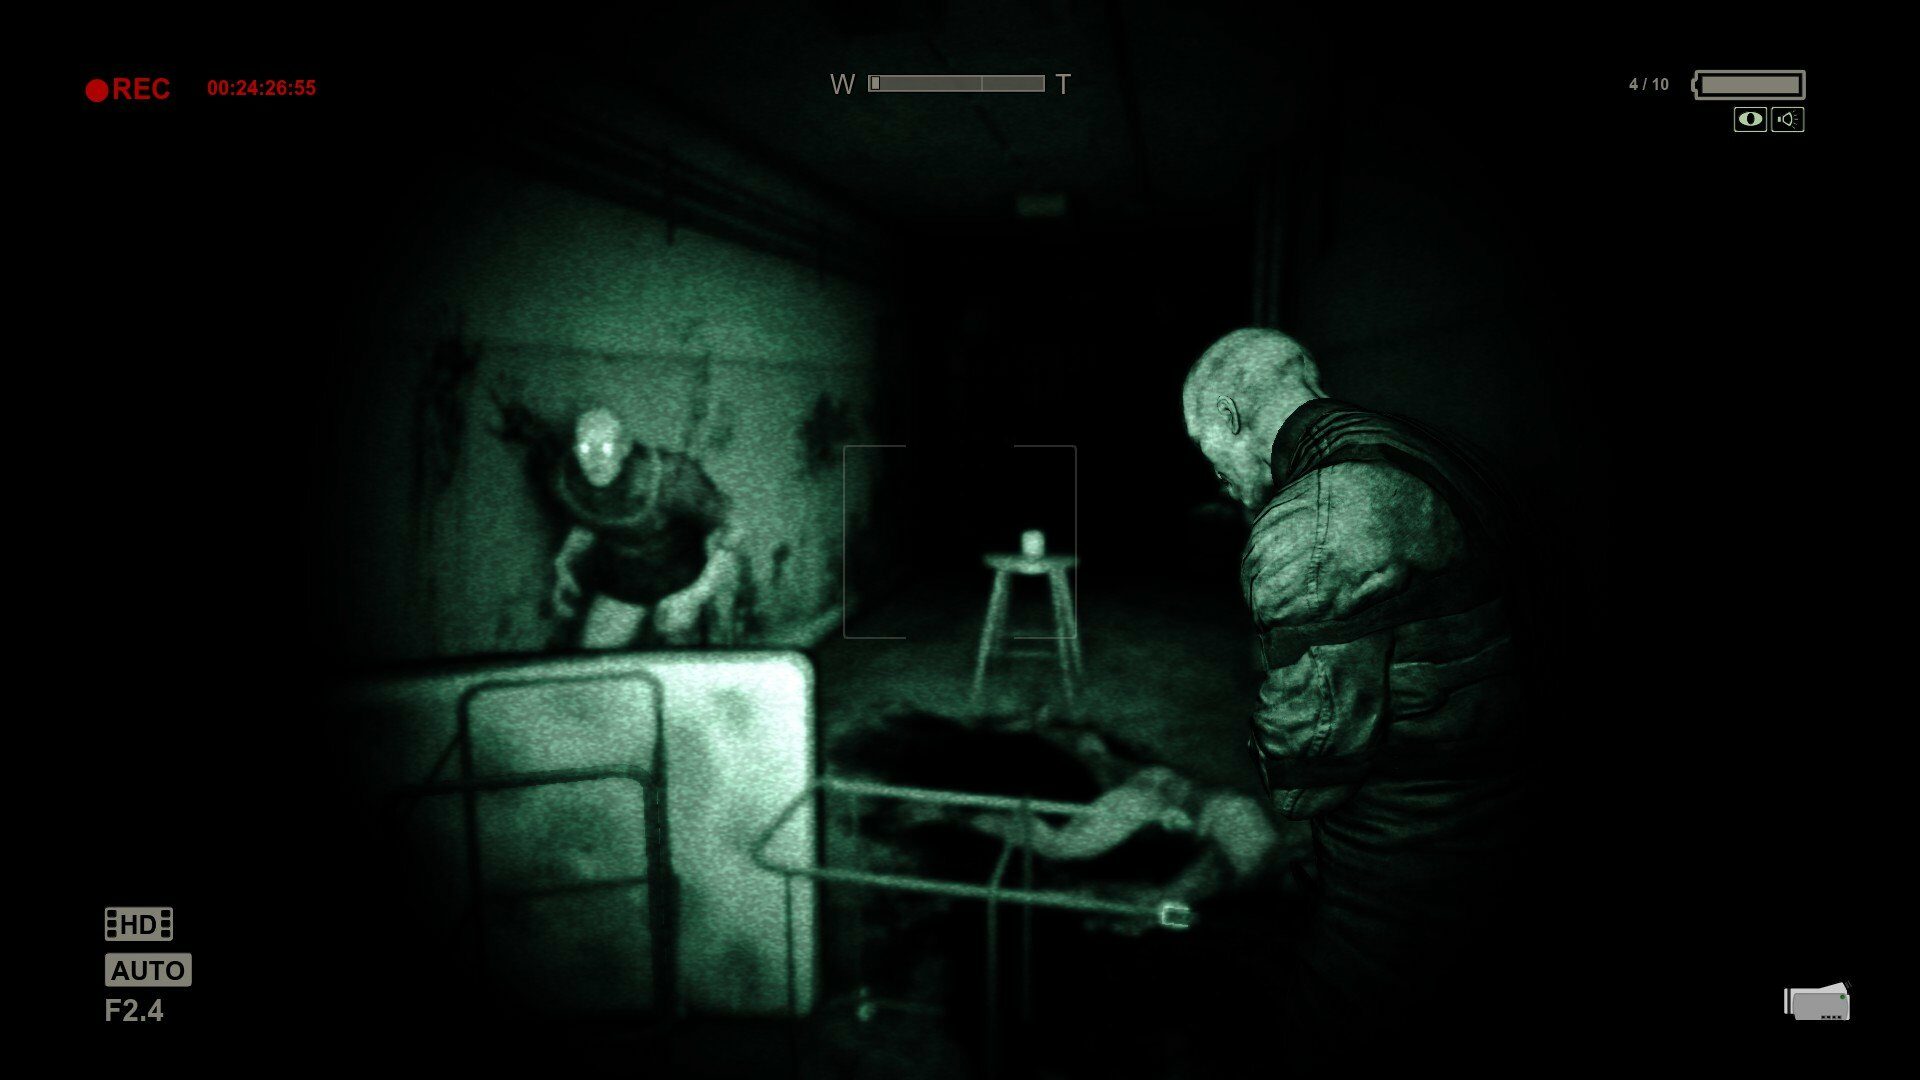 outlast ps